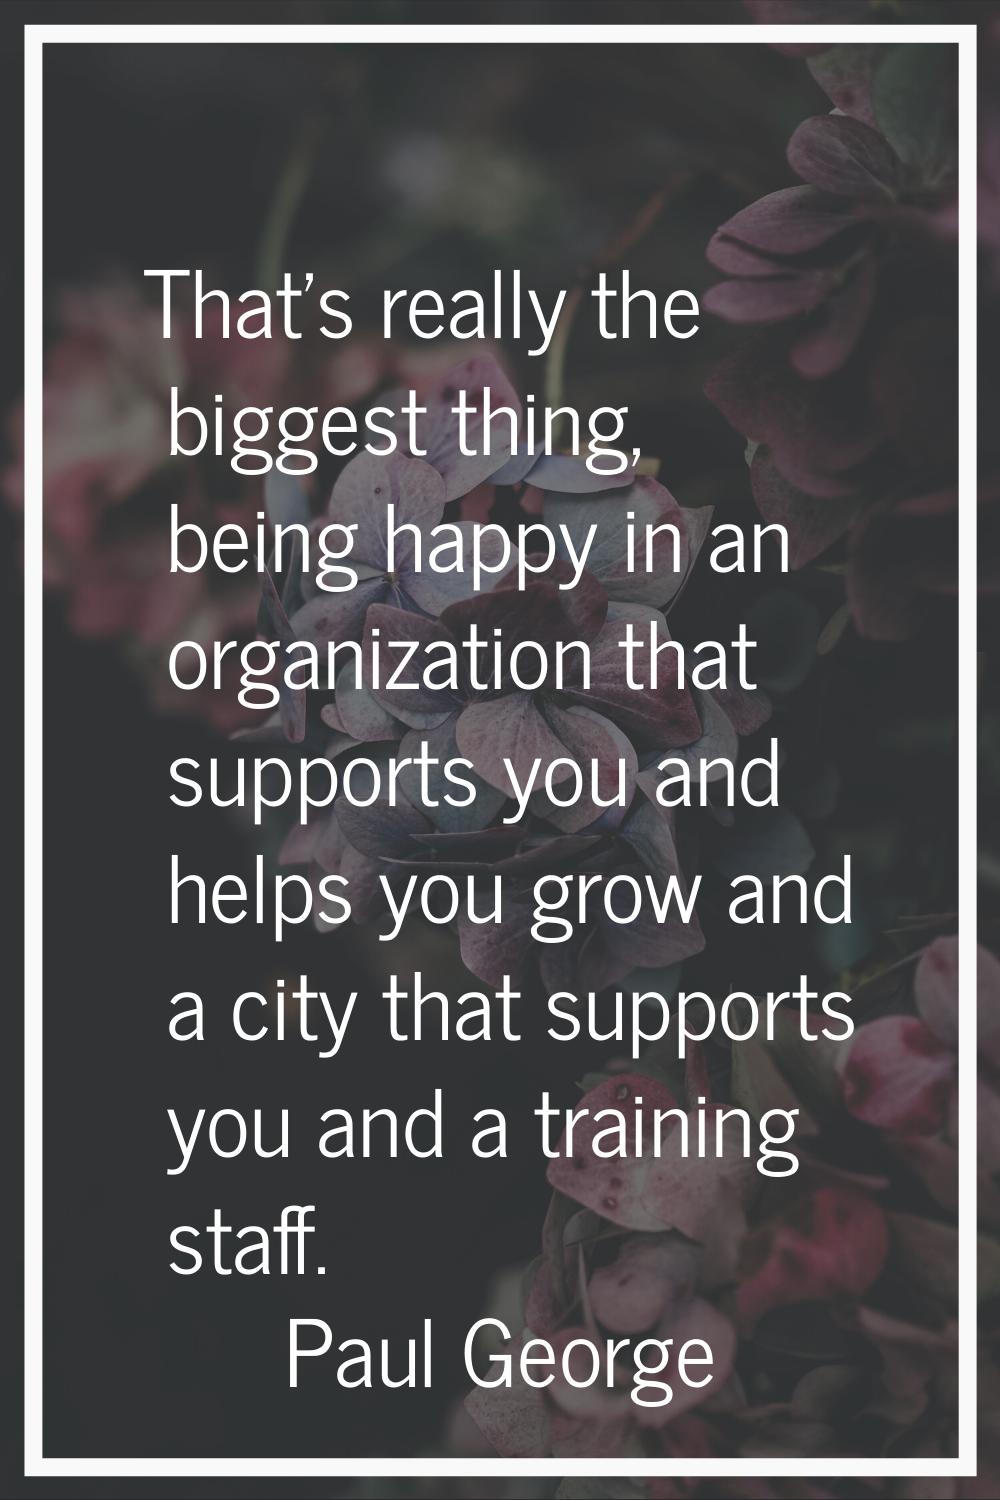 That's really the biggest thing, being happy in an organization that supports you and helps you gro